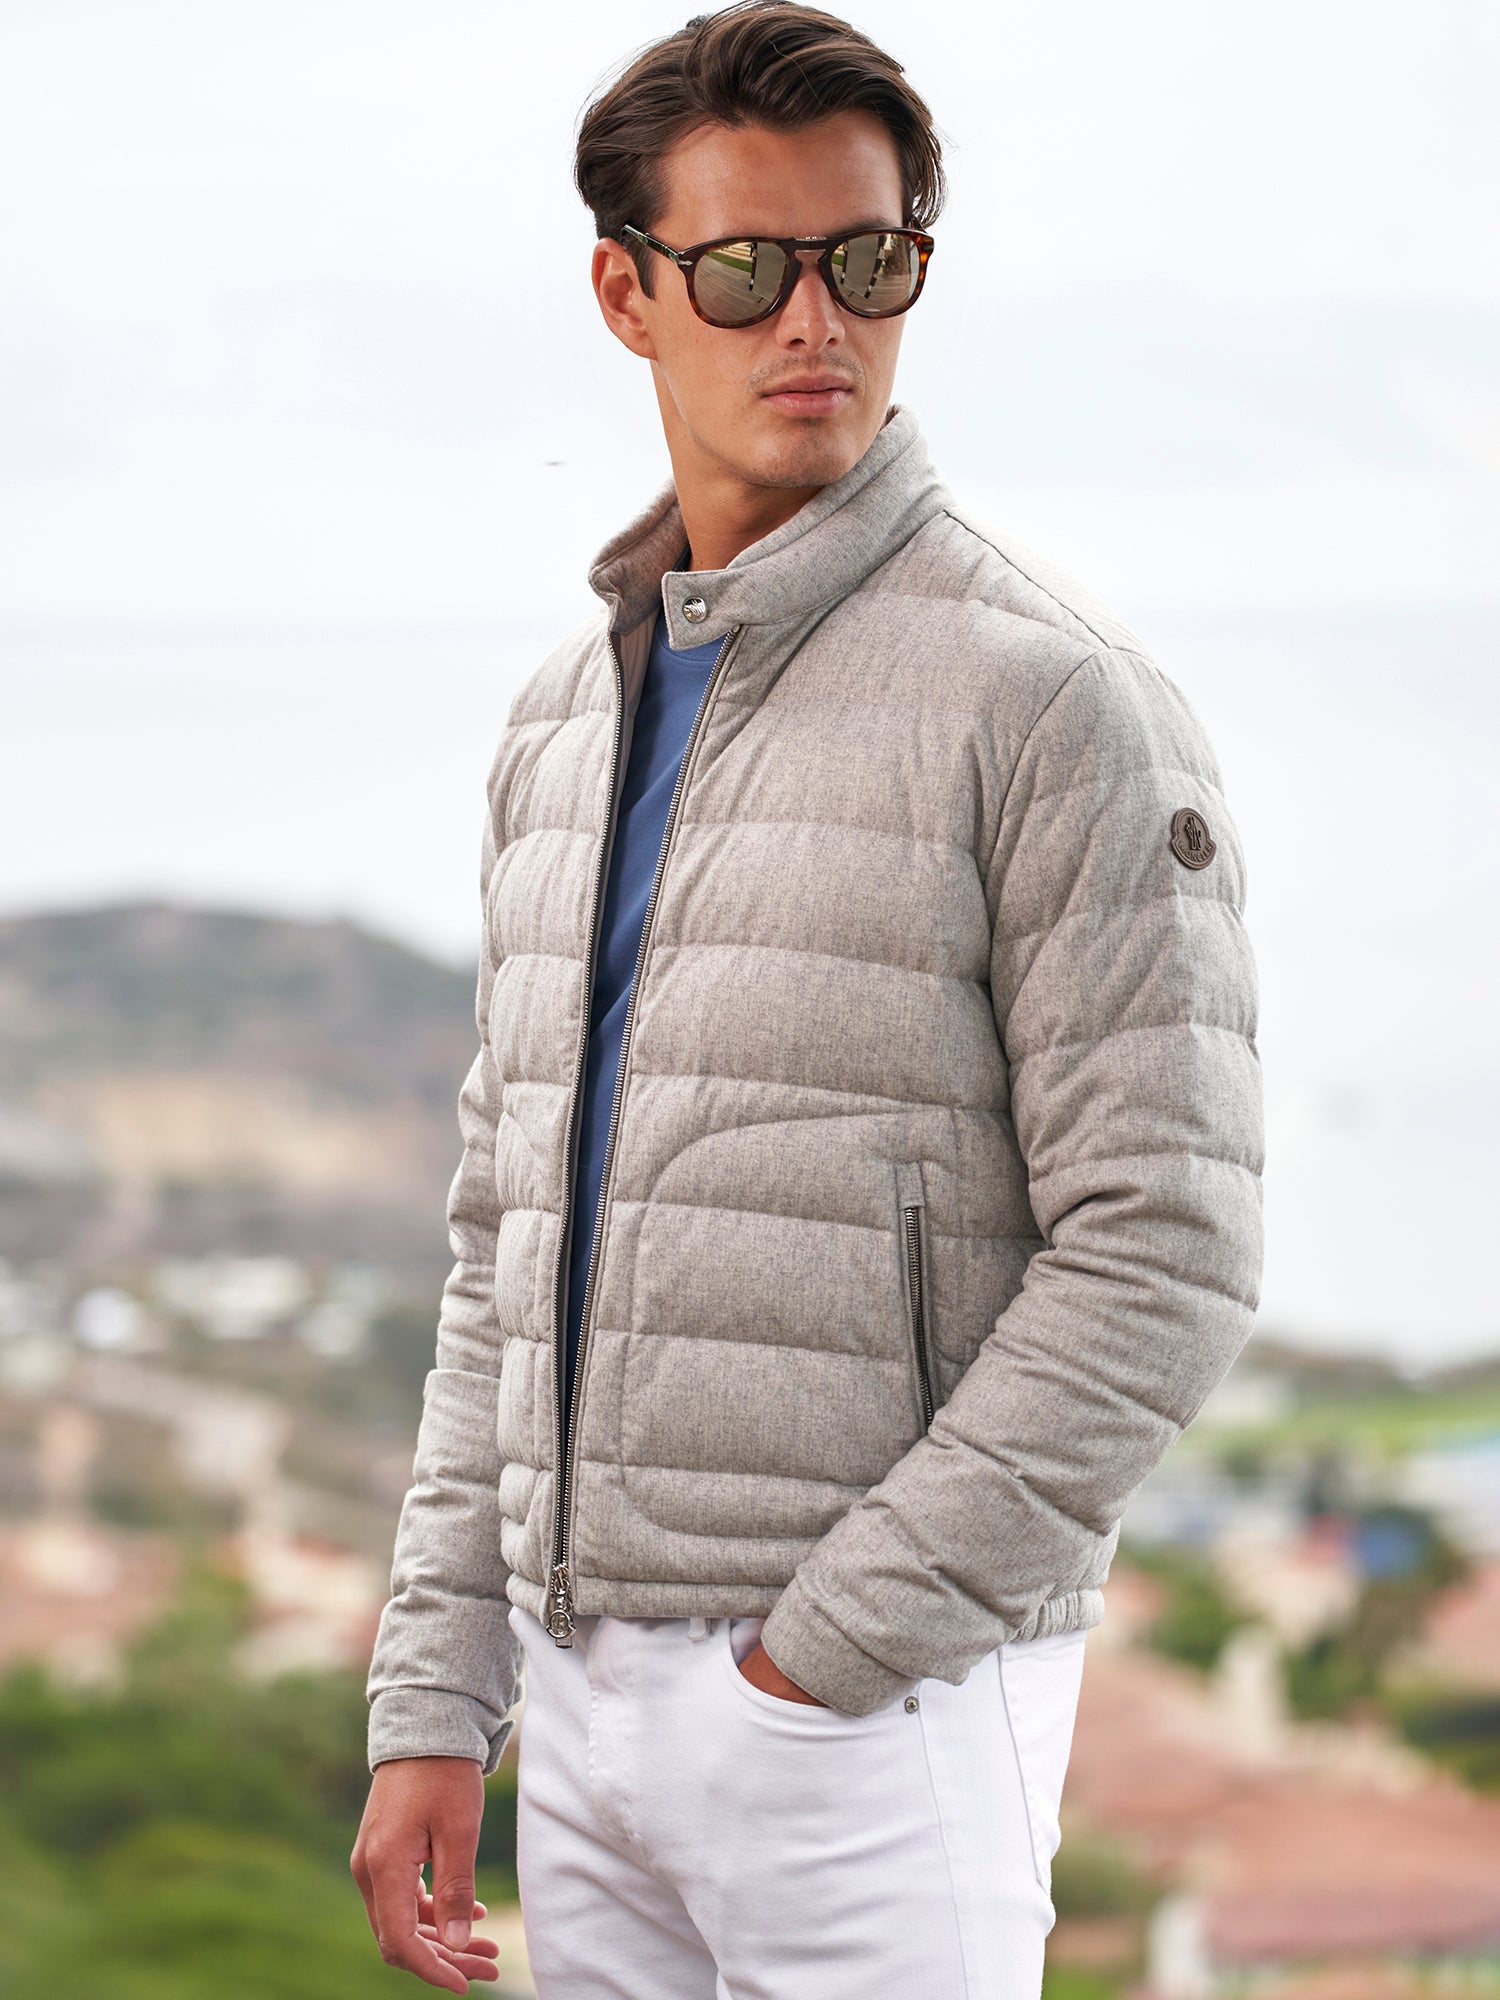 The Cashmere Down Jacket